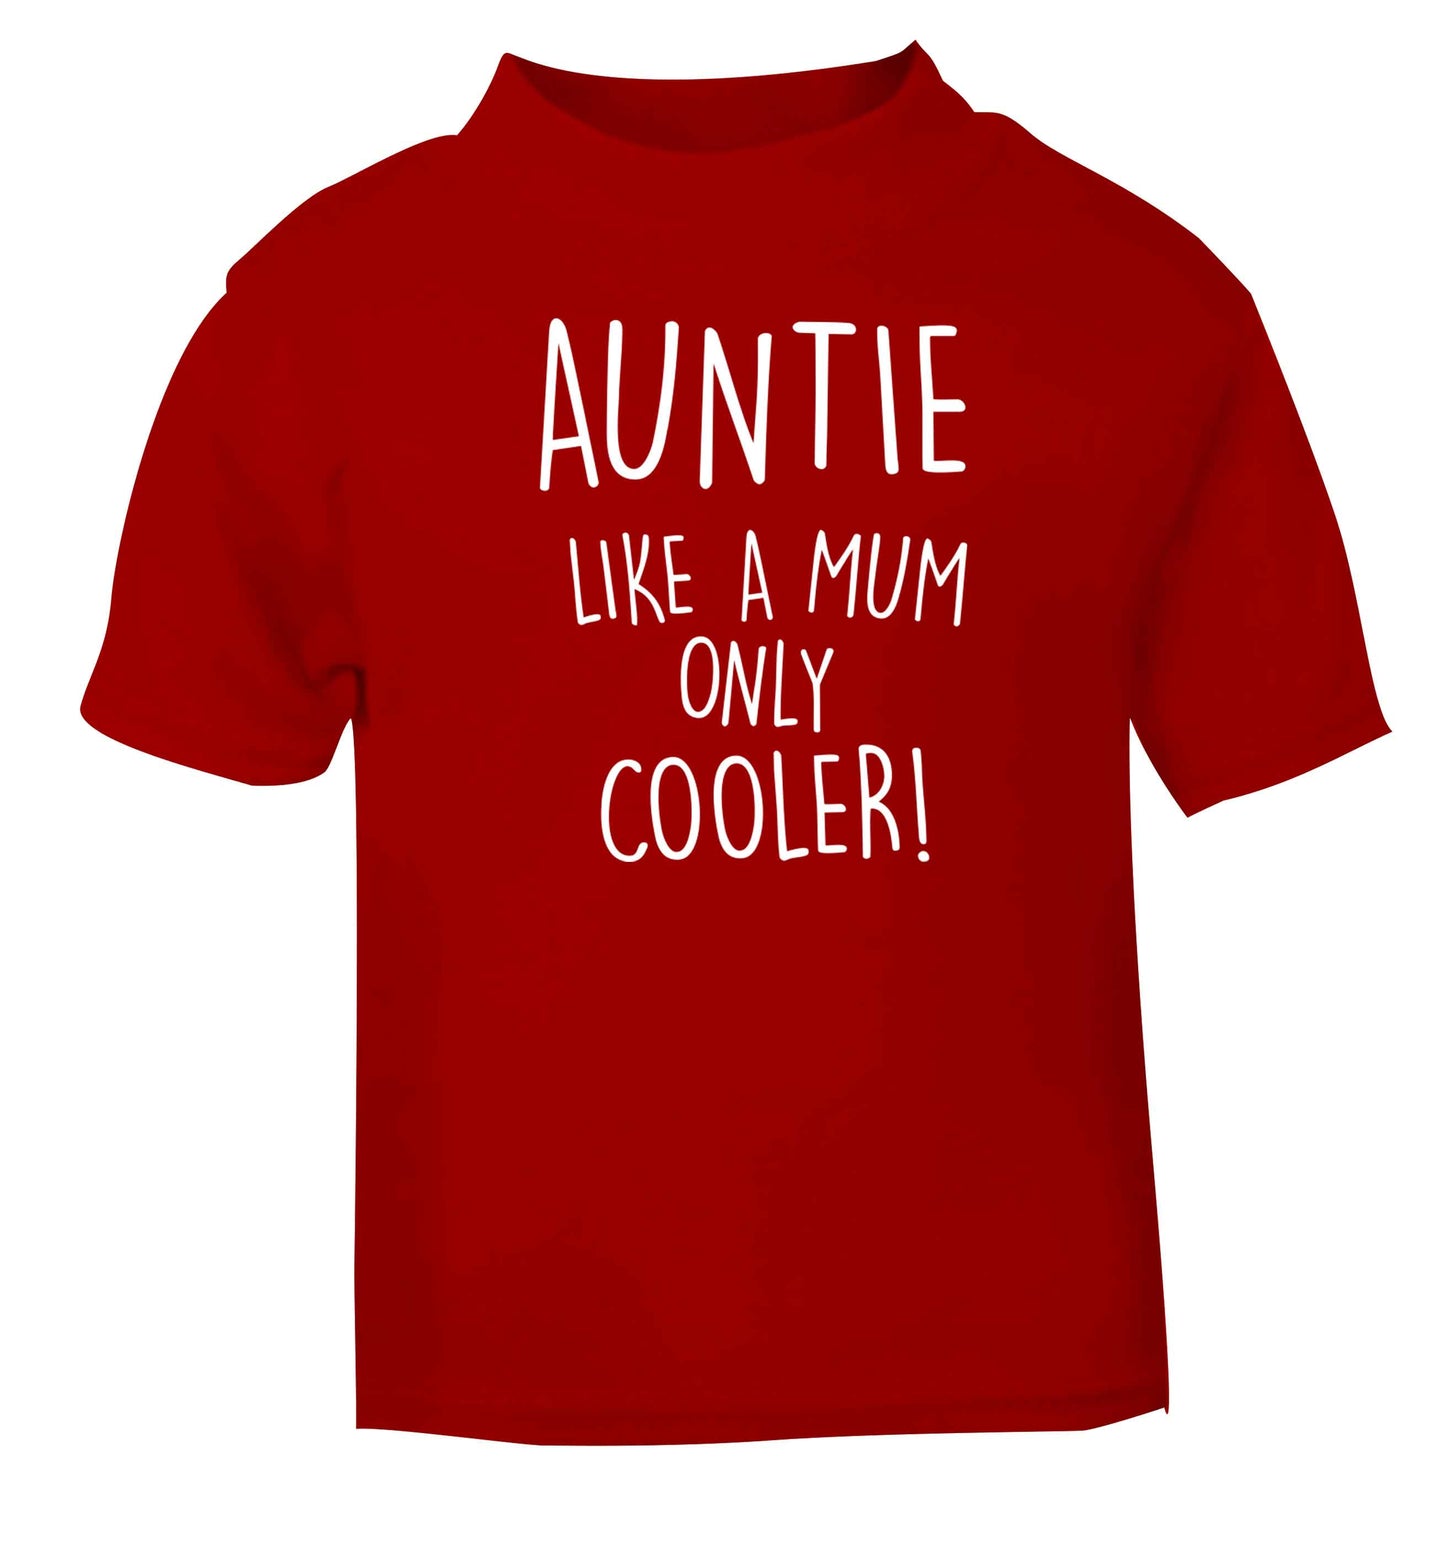 Auntie like a mum only cooler red baby toddler Tshirt 2 Years